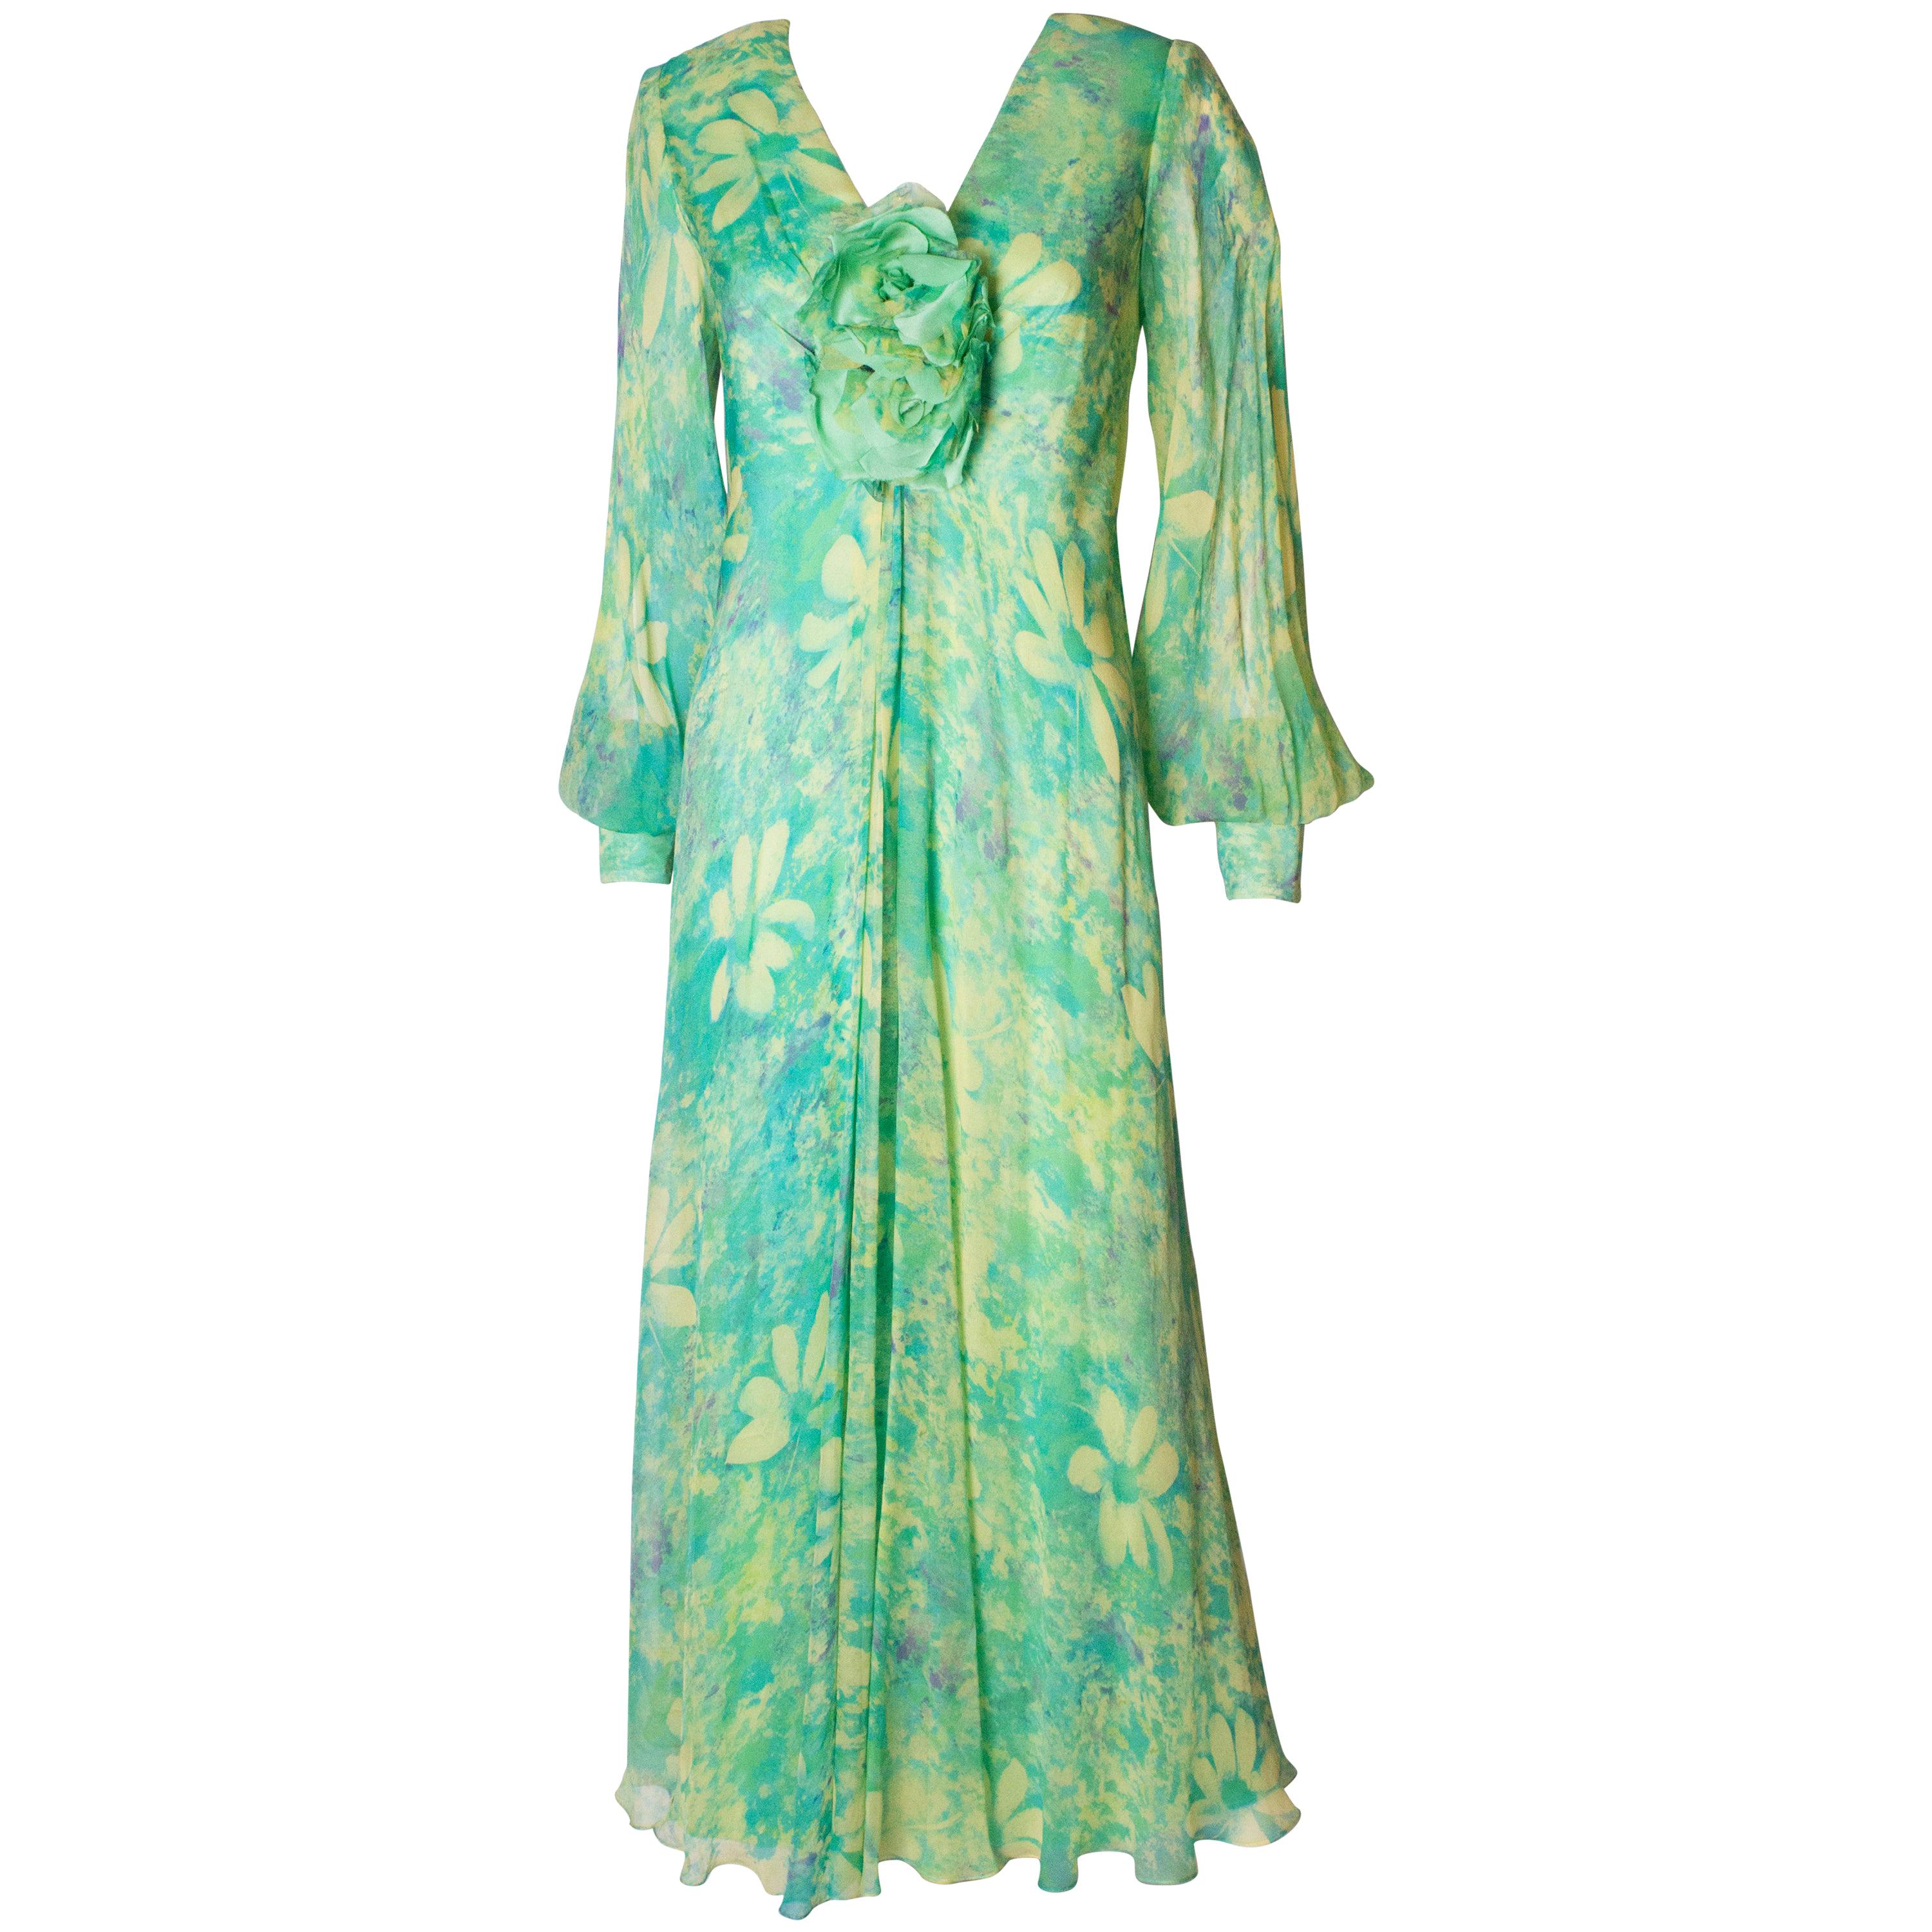 Vintage 1970s green floral print silk dress by Alison Rodger For Sale